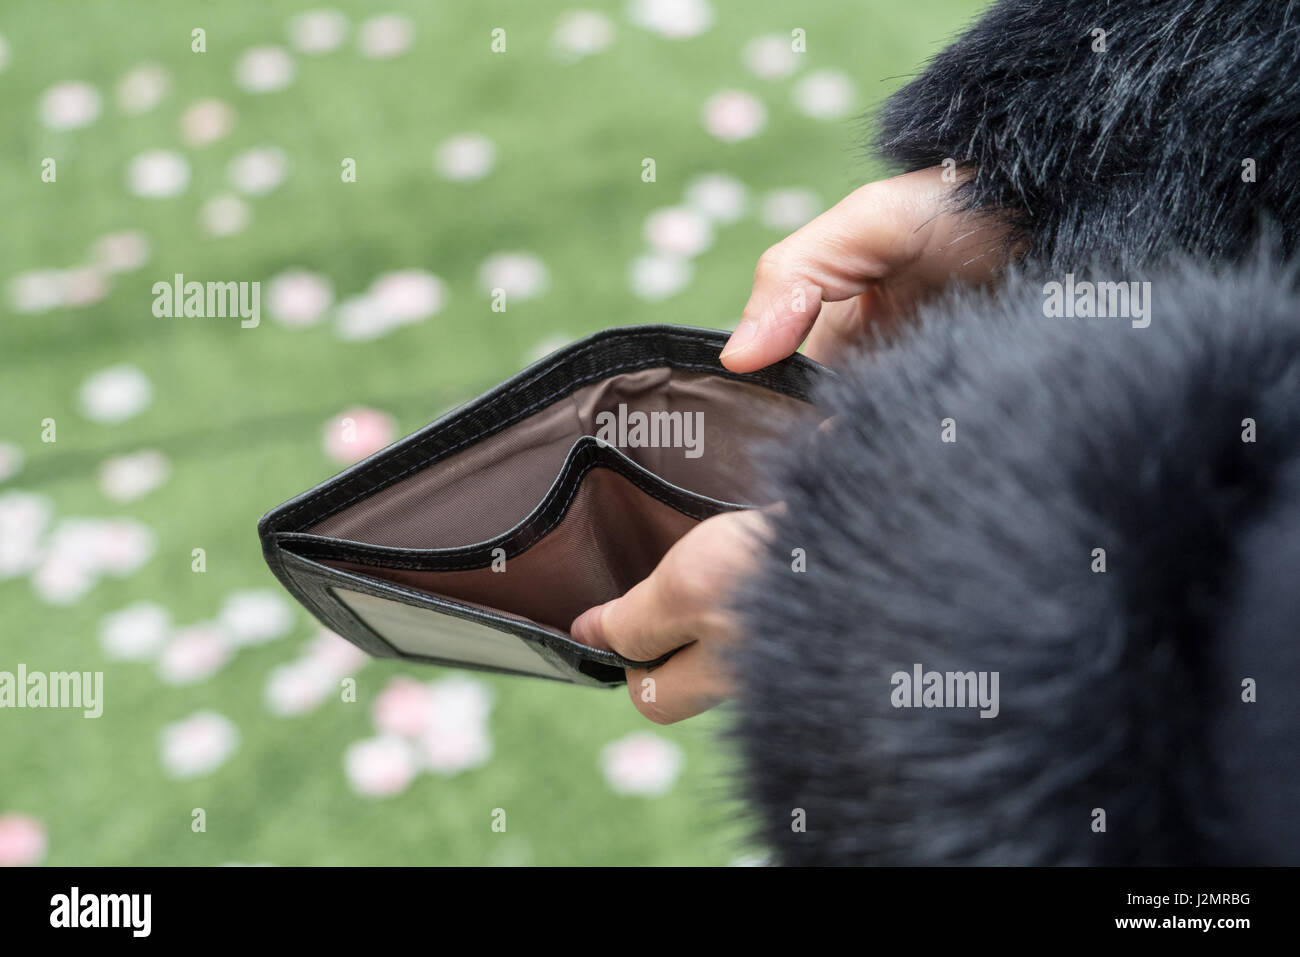 Empty purse in his hands stock image. Image of crisis - 27060911